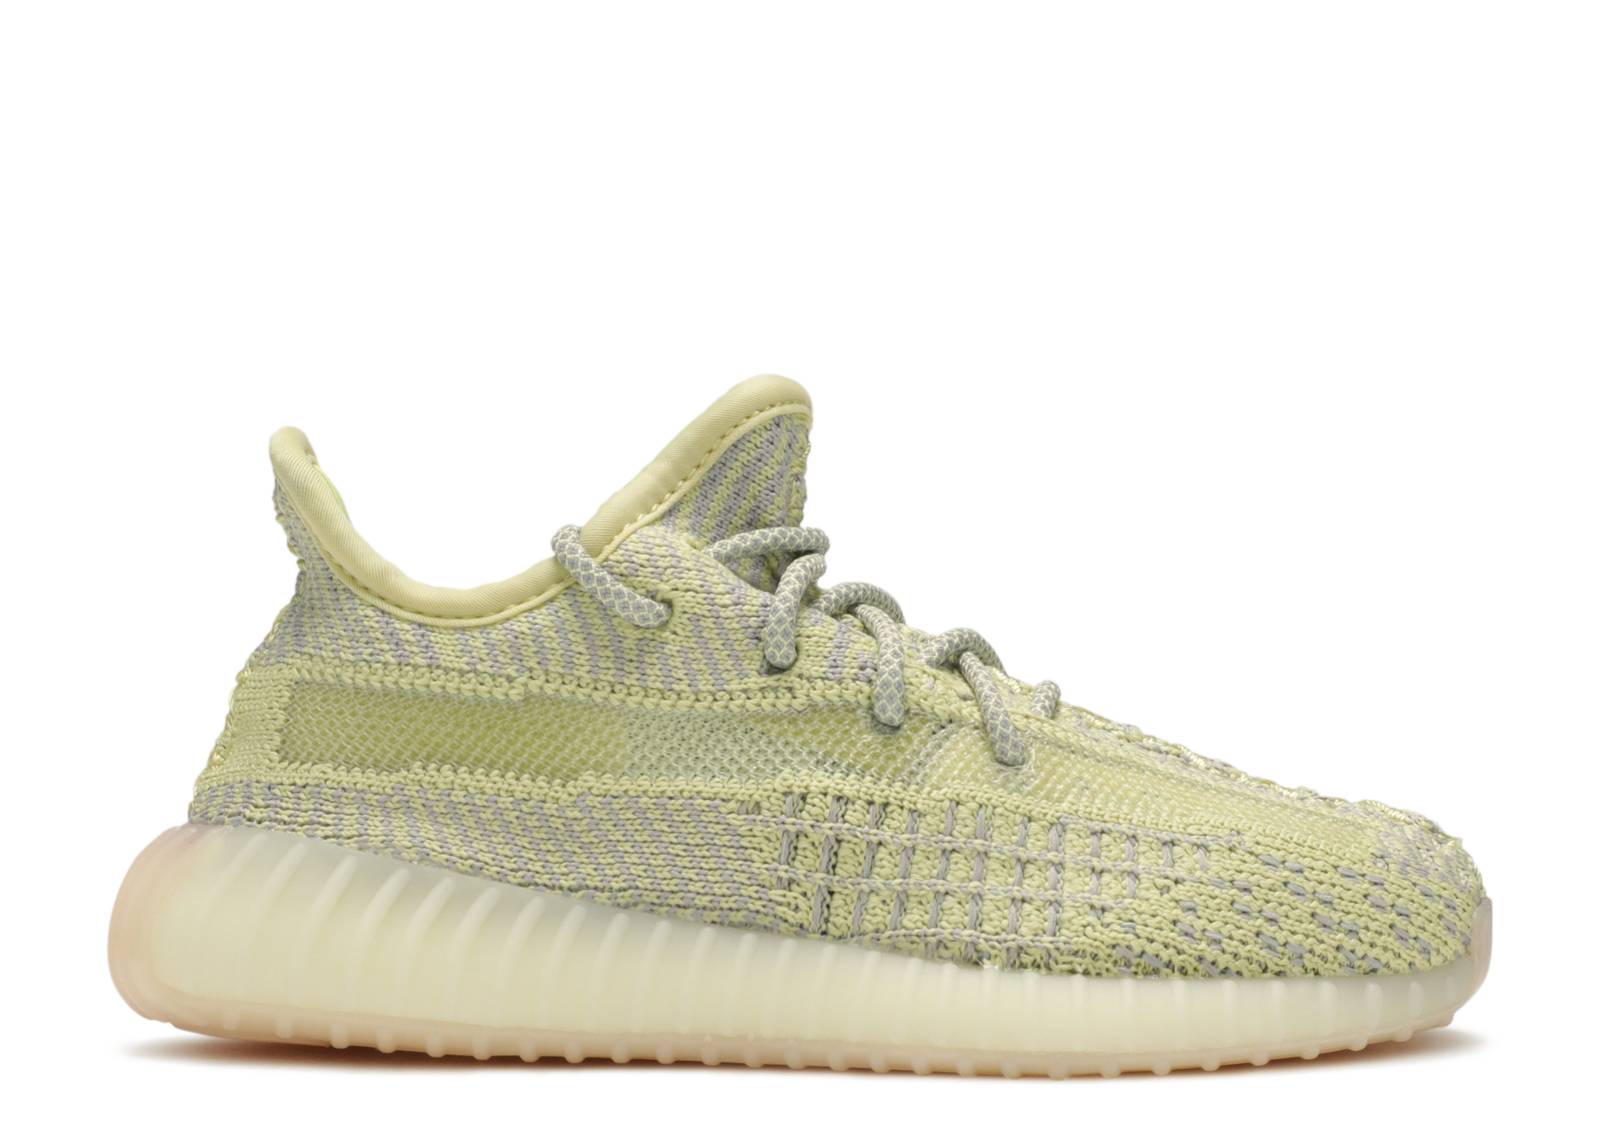 Yeezy Boost 350 V2 Kids 'Antlia Non-Reflective'Color:Yellow,Size:8